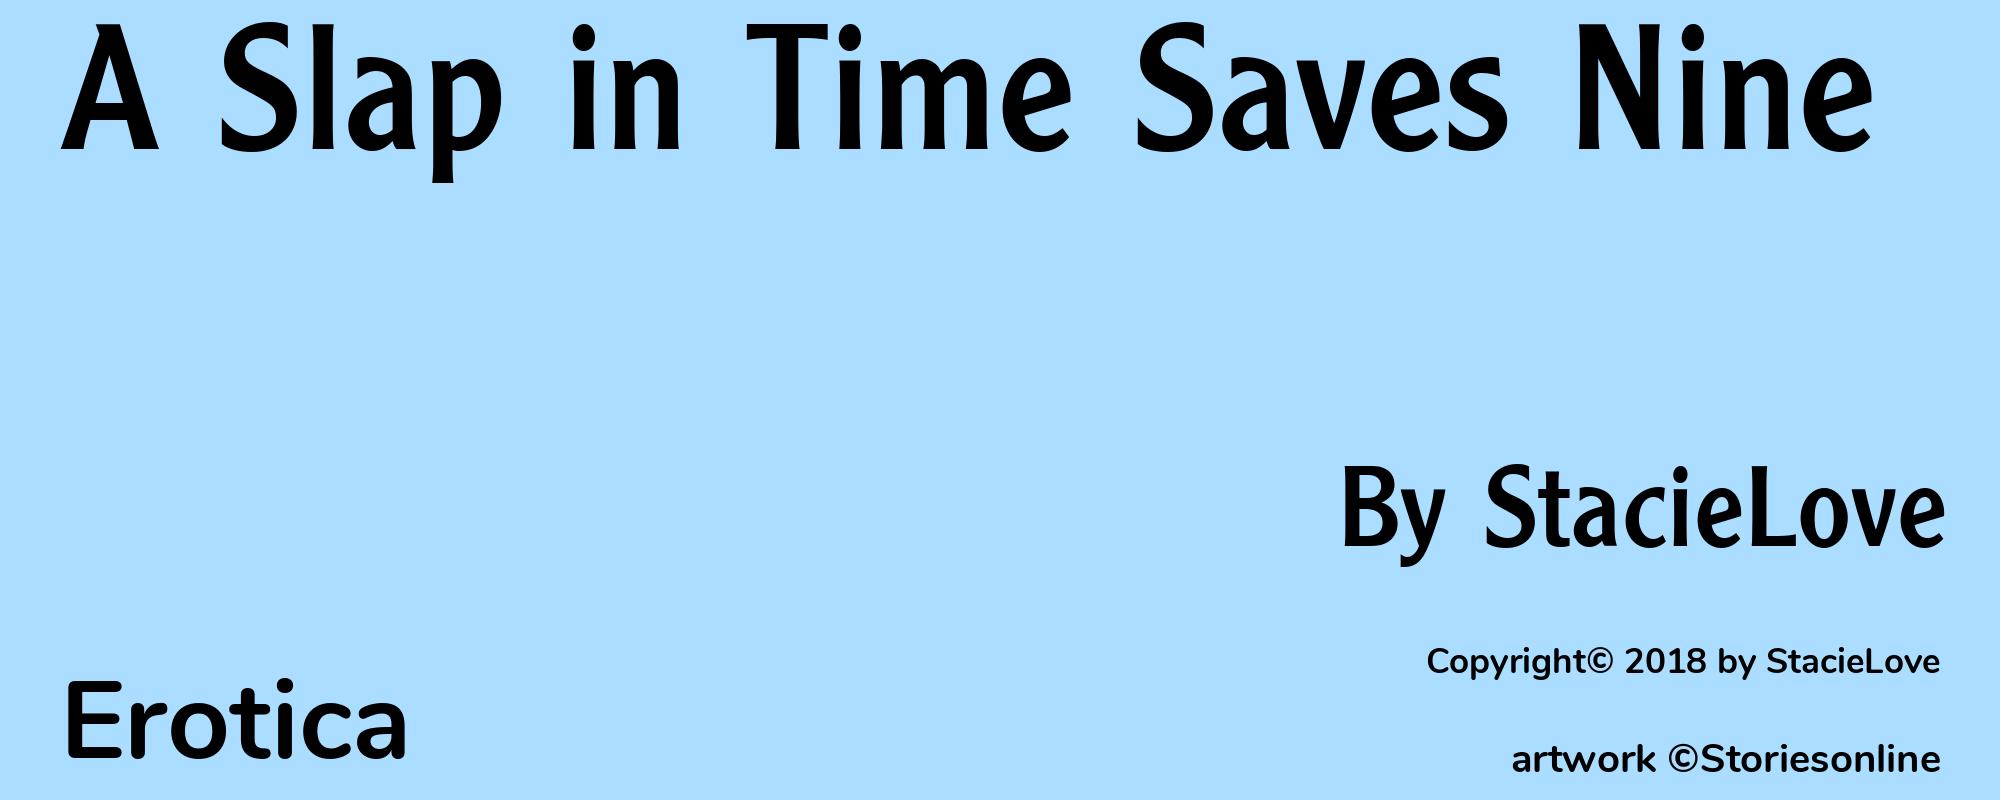 A Slap in Time Saves Nine - Cover